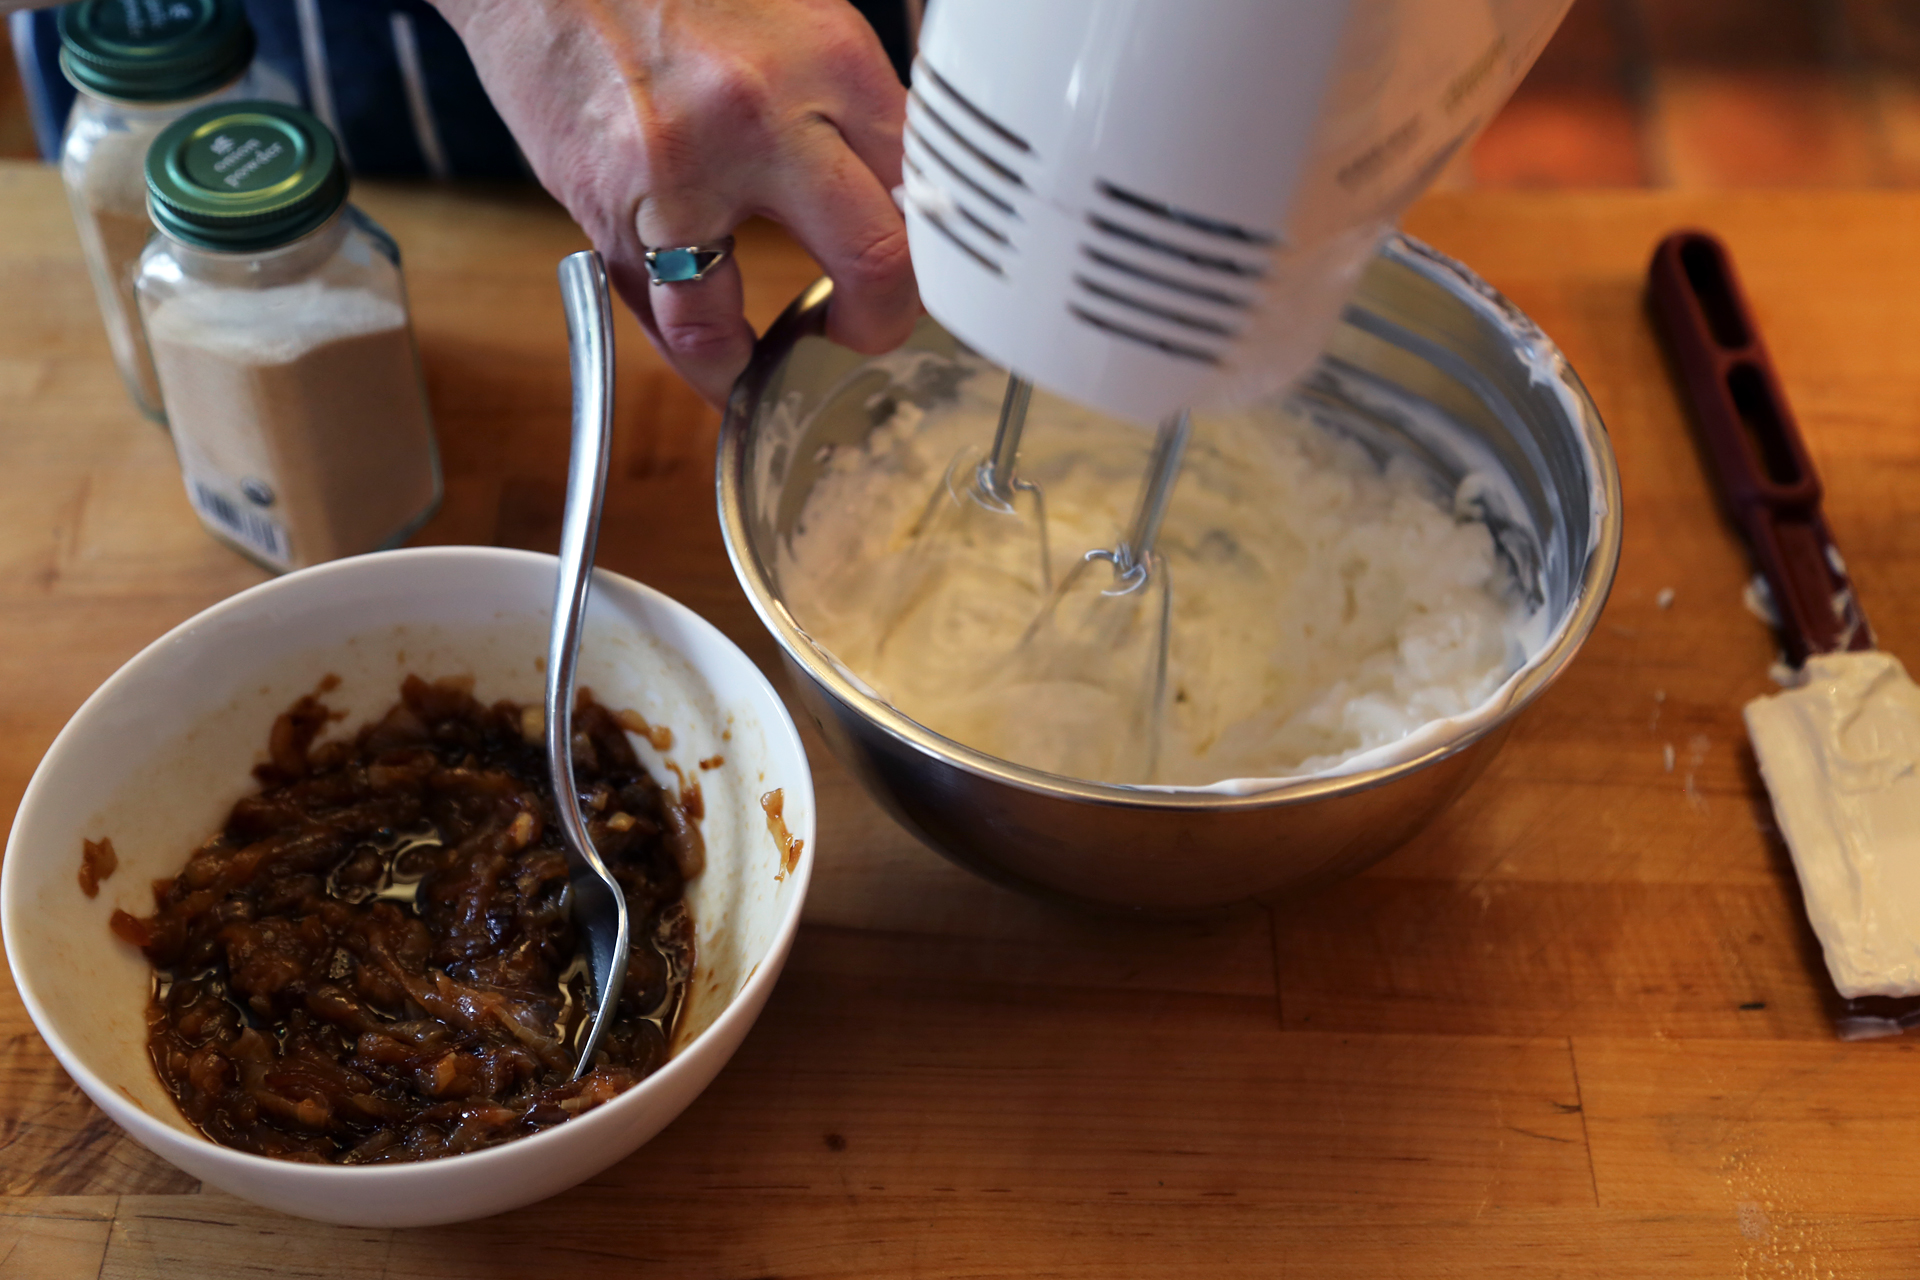 Add the sour cream and cream cheese to a mixing bowl and beat with an electric hand mixer or a wooden spoon until smooth and well combined.